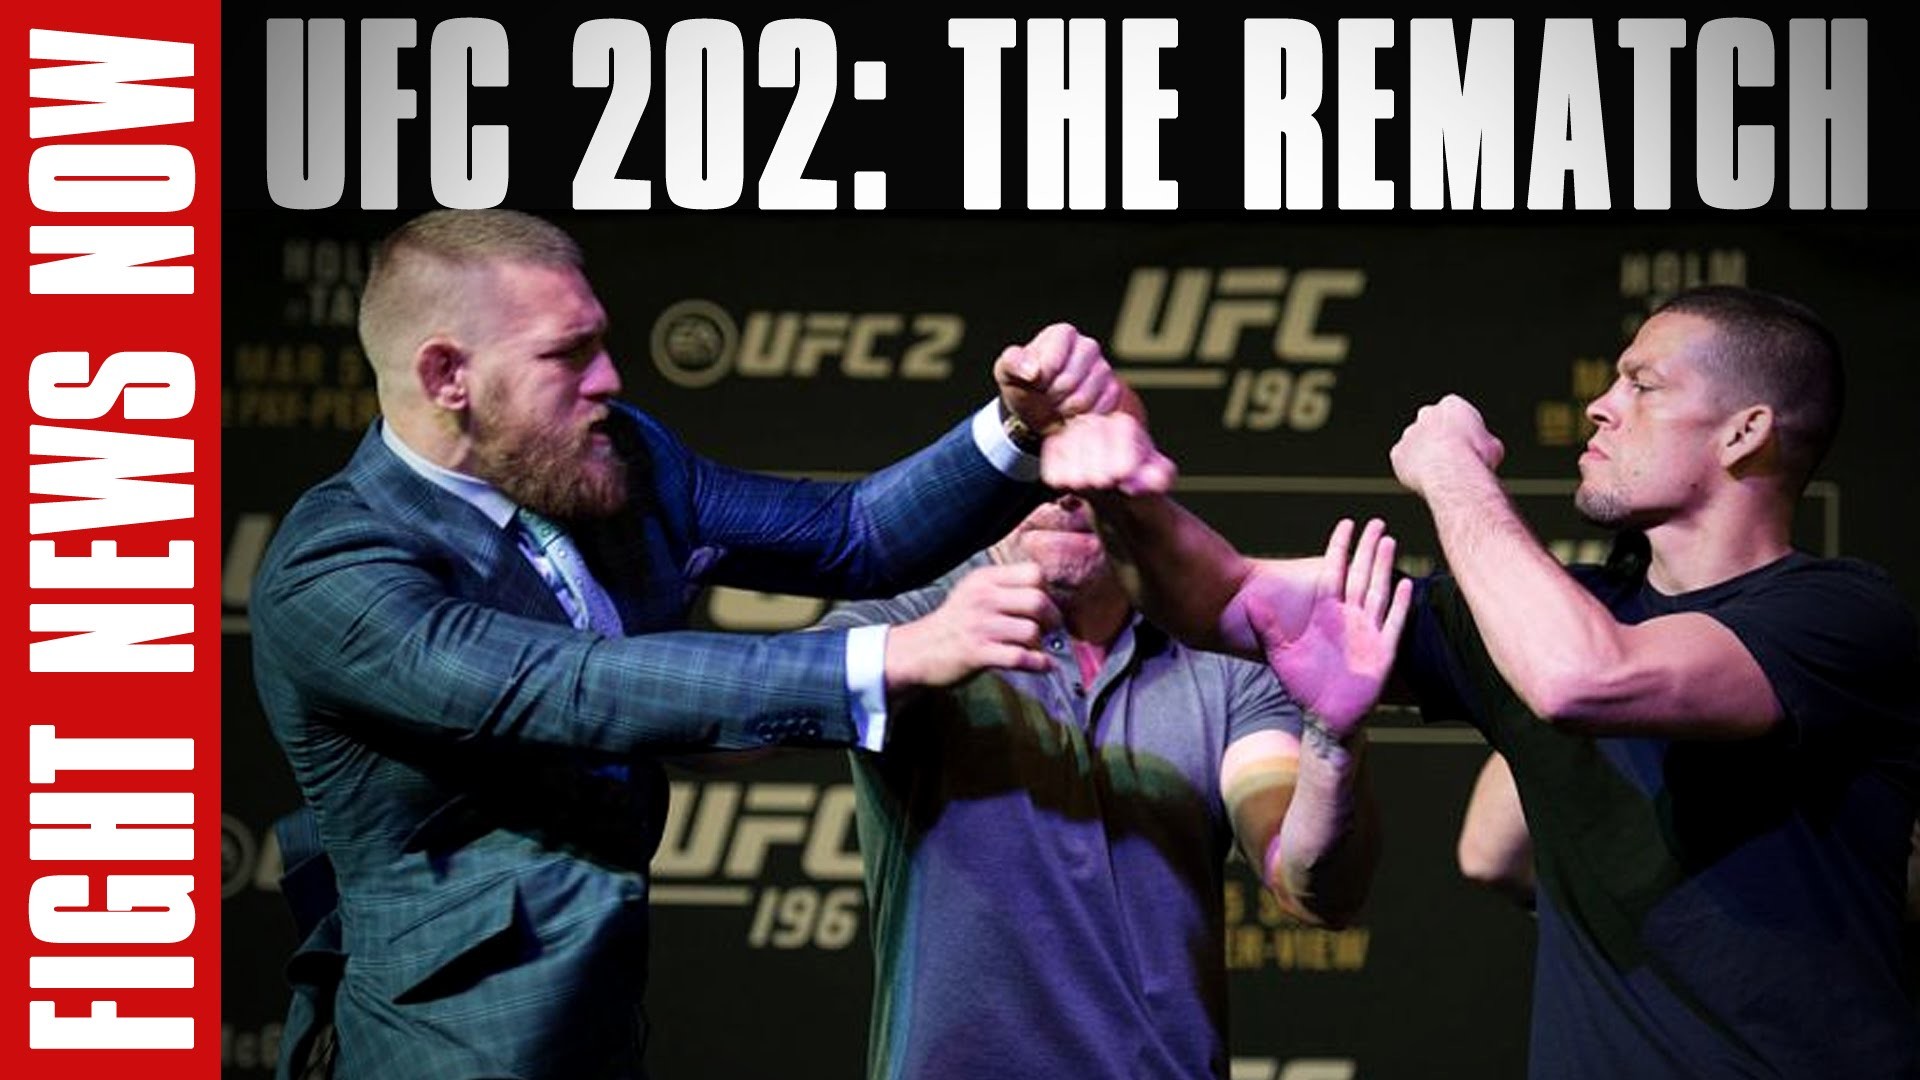 1920x1080 UFC 202: Nate Diaz vs. Conor McGregor Rematch, Ariel Helwani's Ban Lifted  by UFC on Fight News Now - YouTube